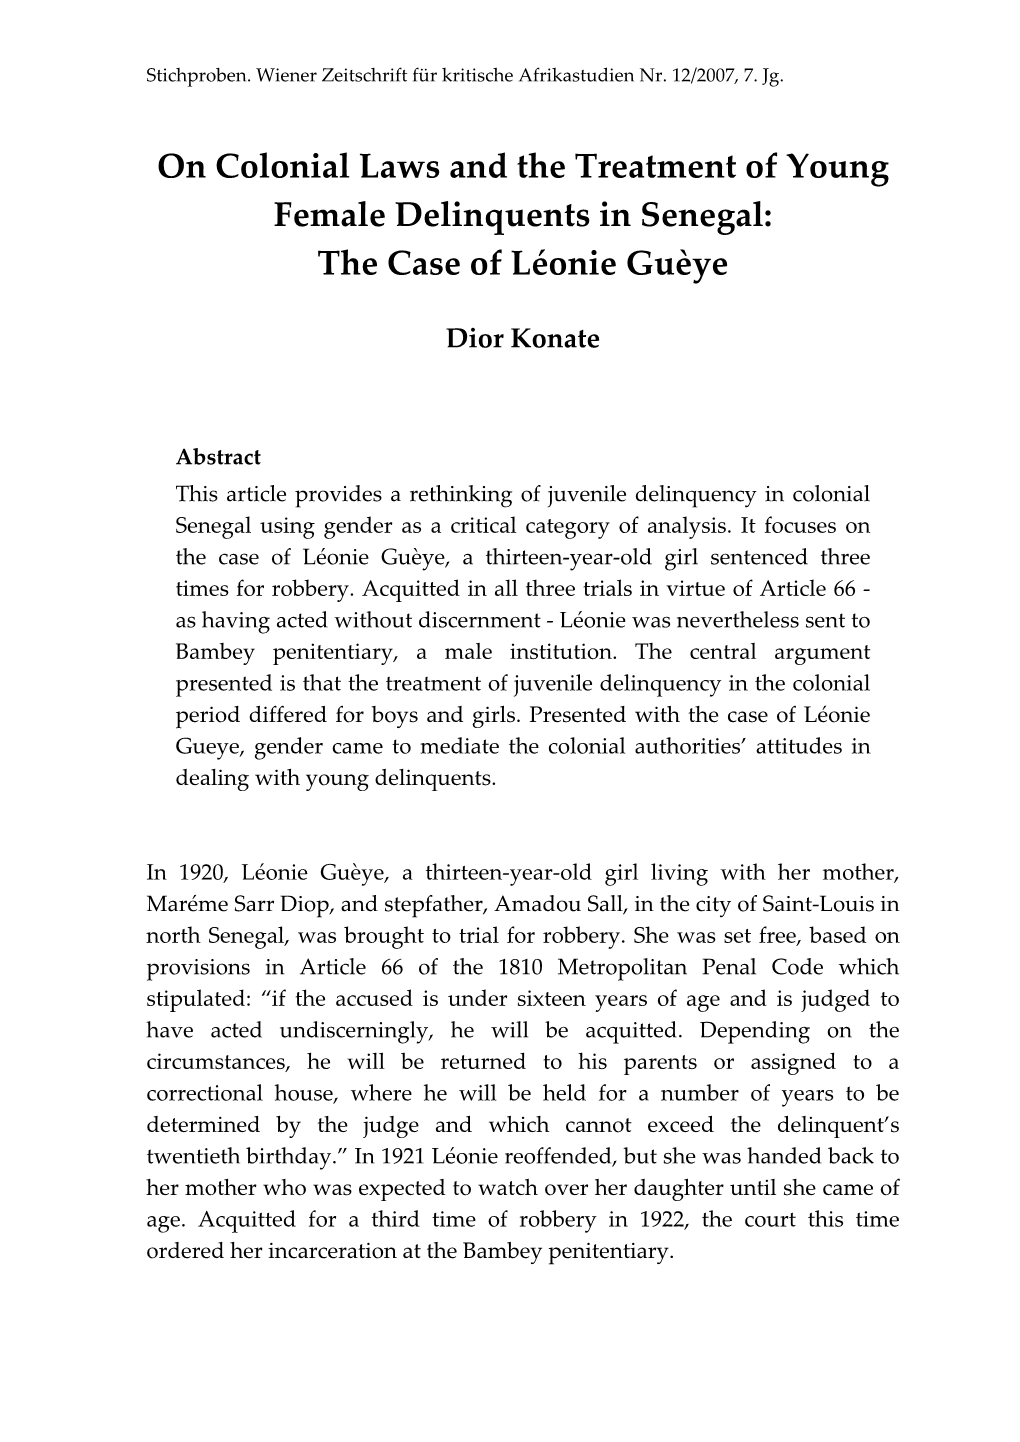 On Colonial Laws and the Treatment of Young Female Delinquents in Senegal: the Case of Léonie Guèye